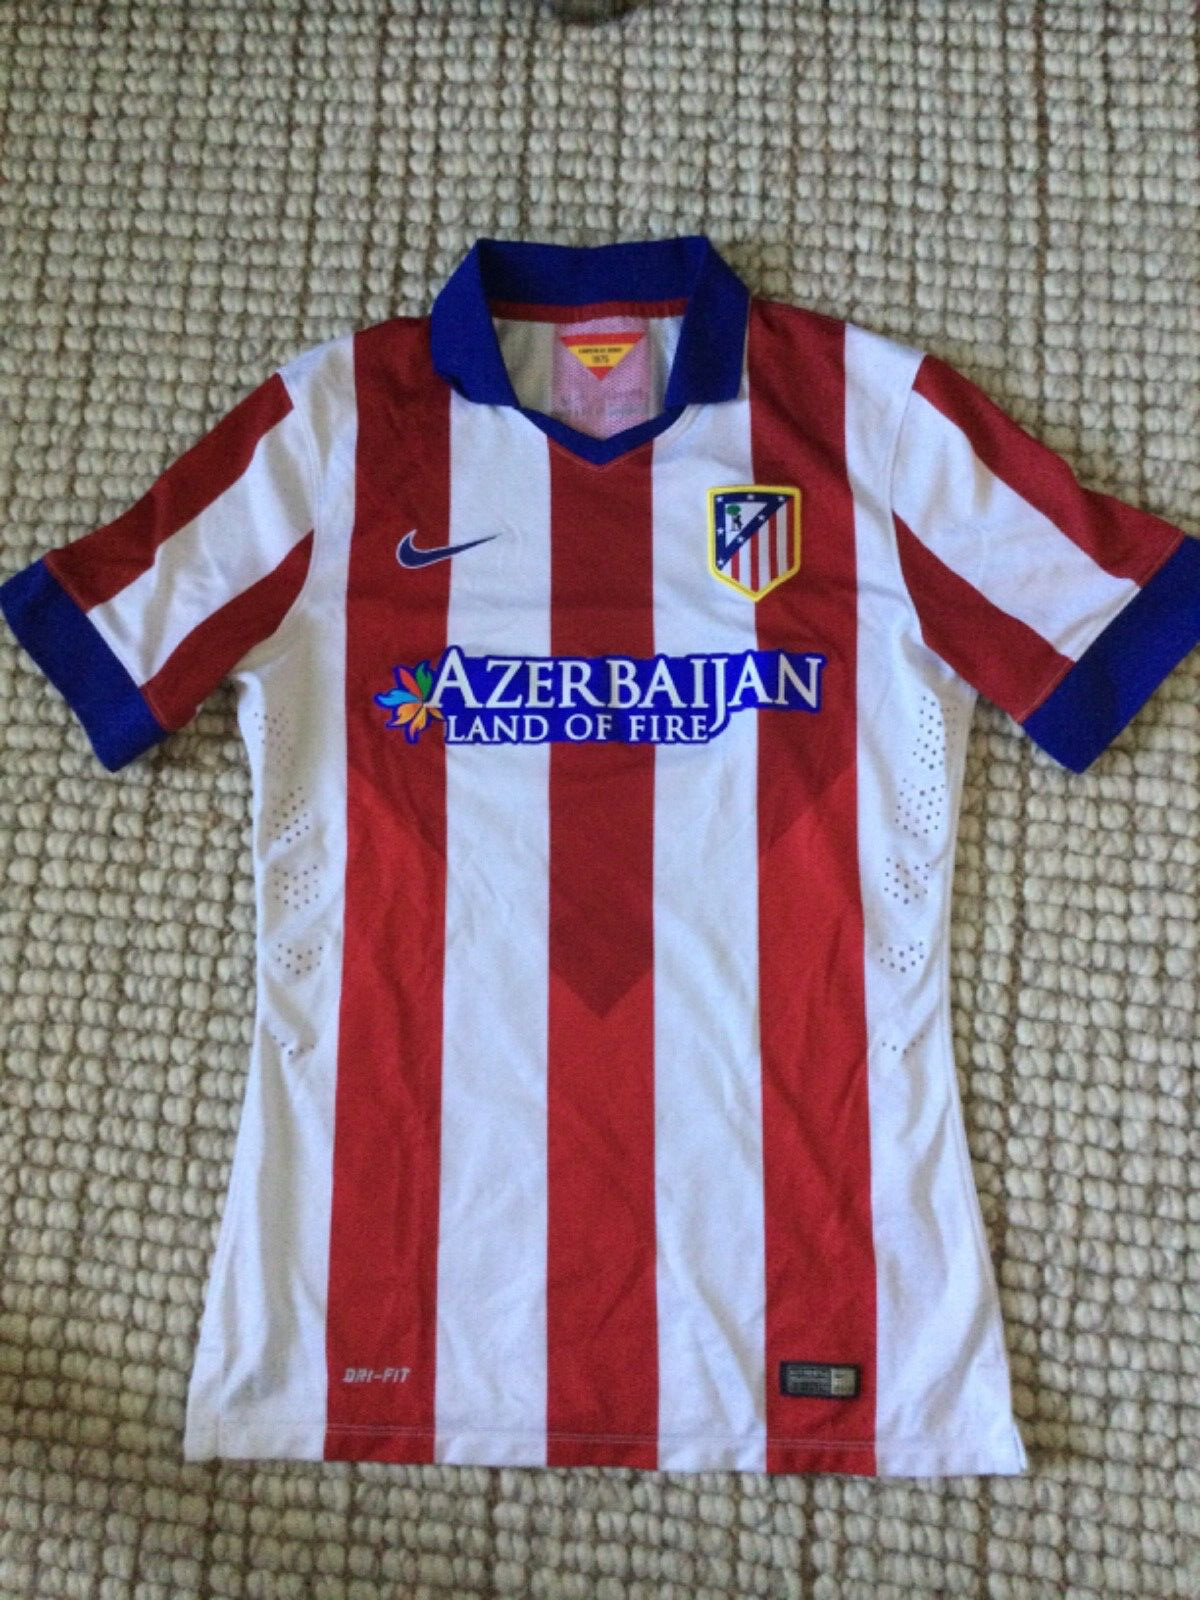 2014/15 Nike Atletico Madrid Player Issue Champions League Home Jersey - Medium